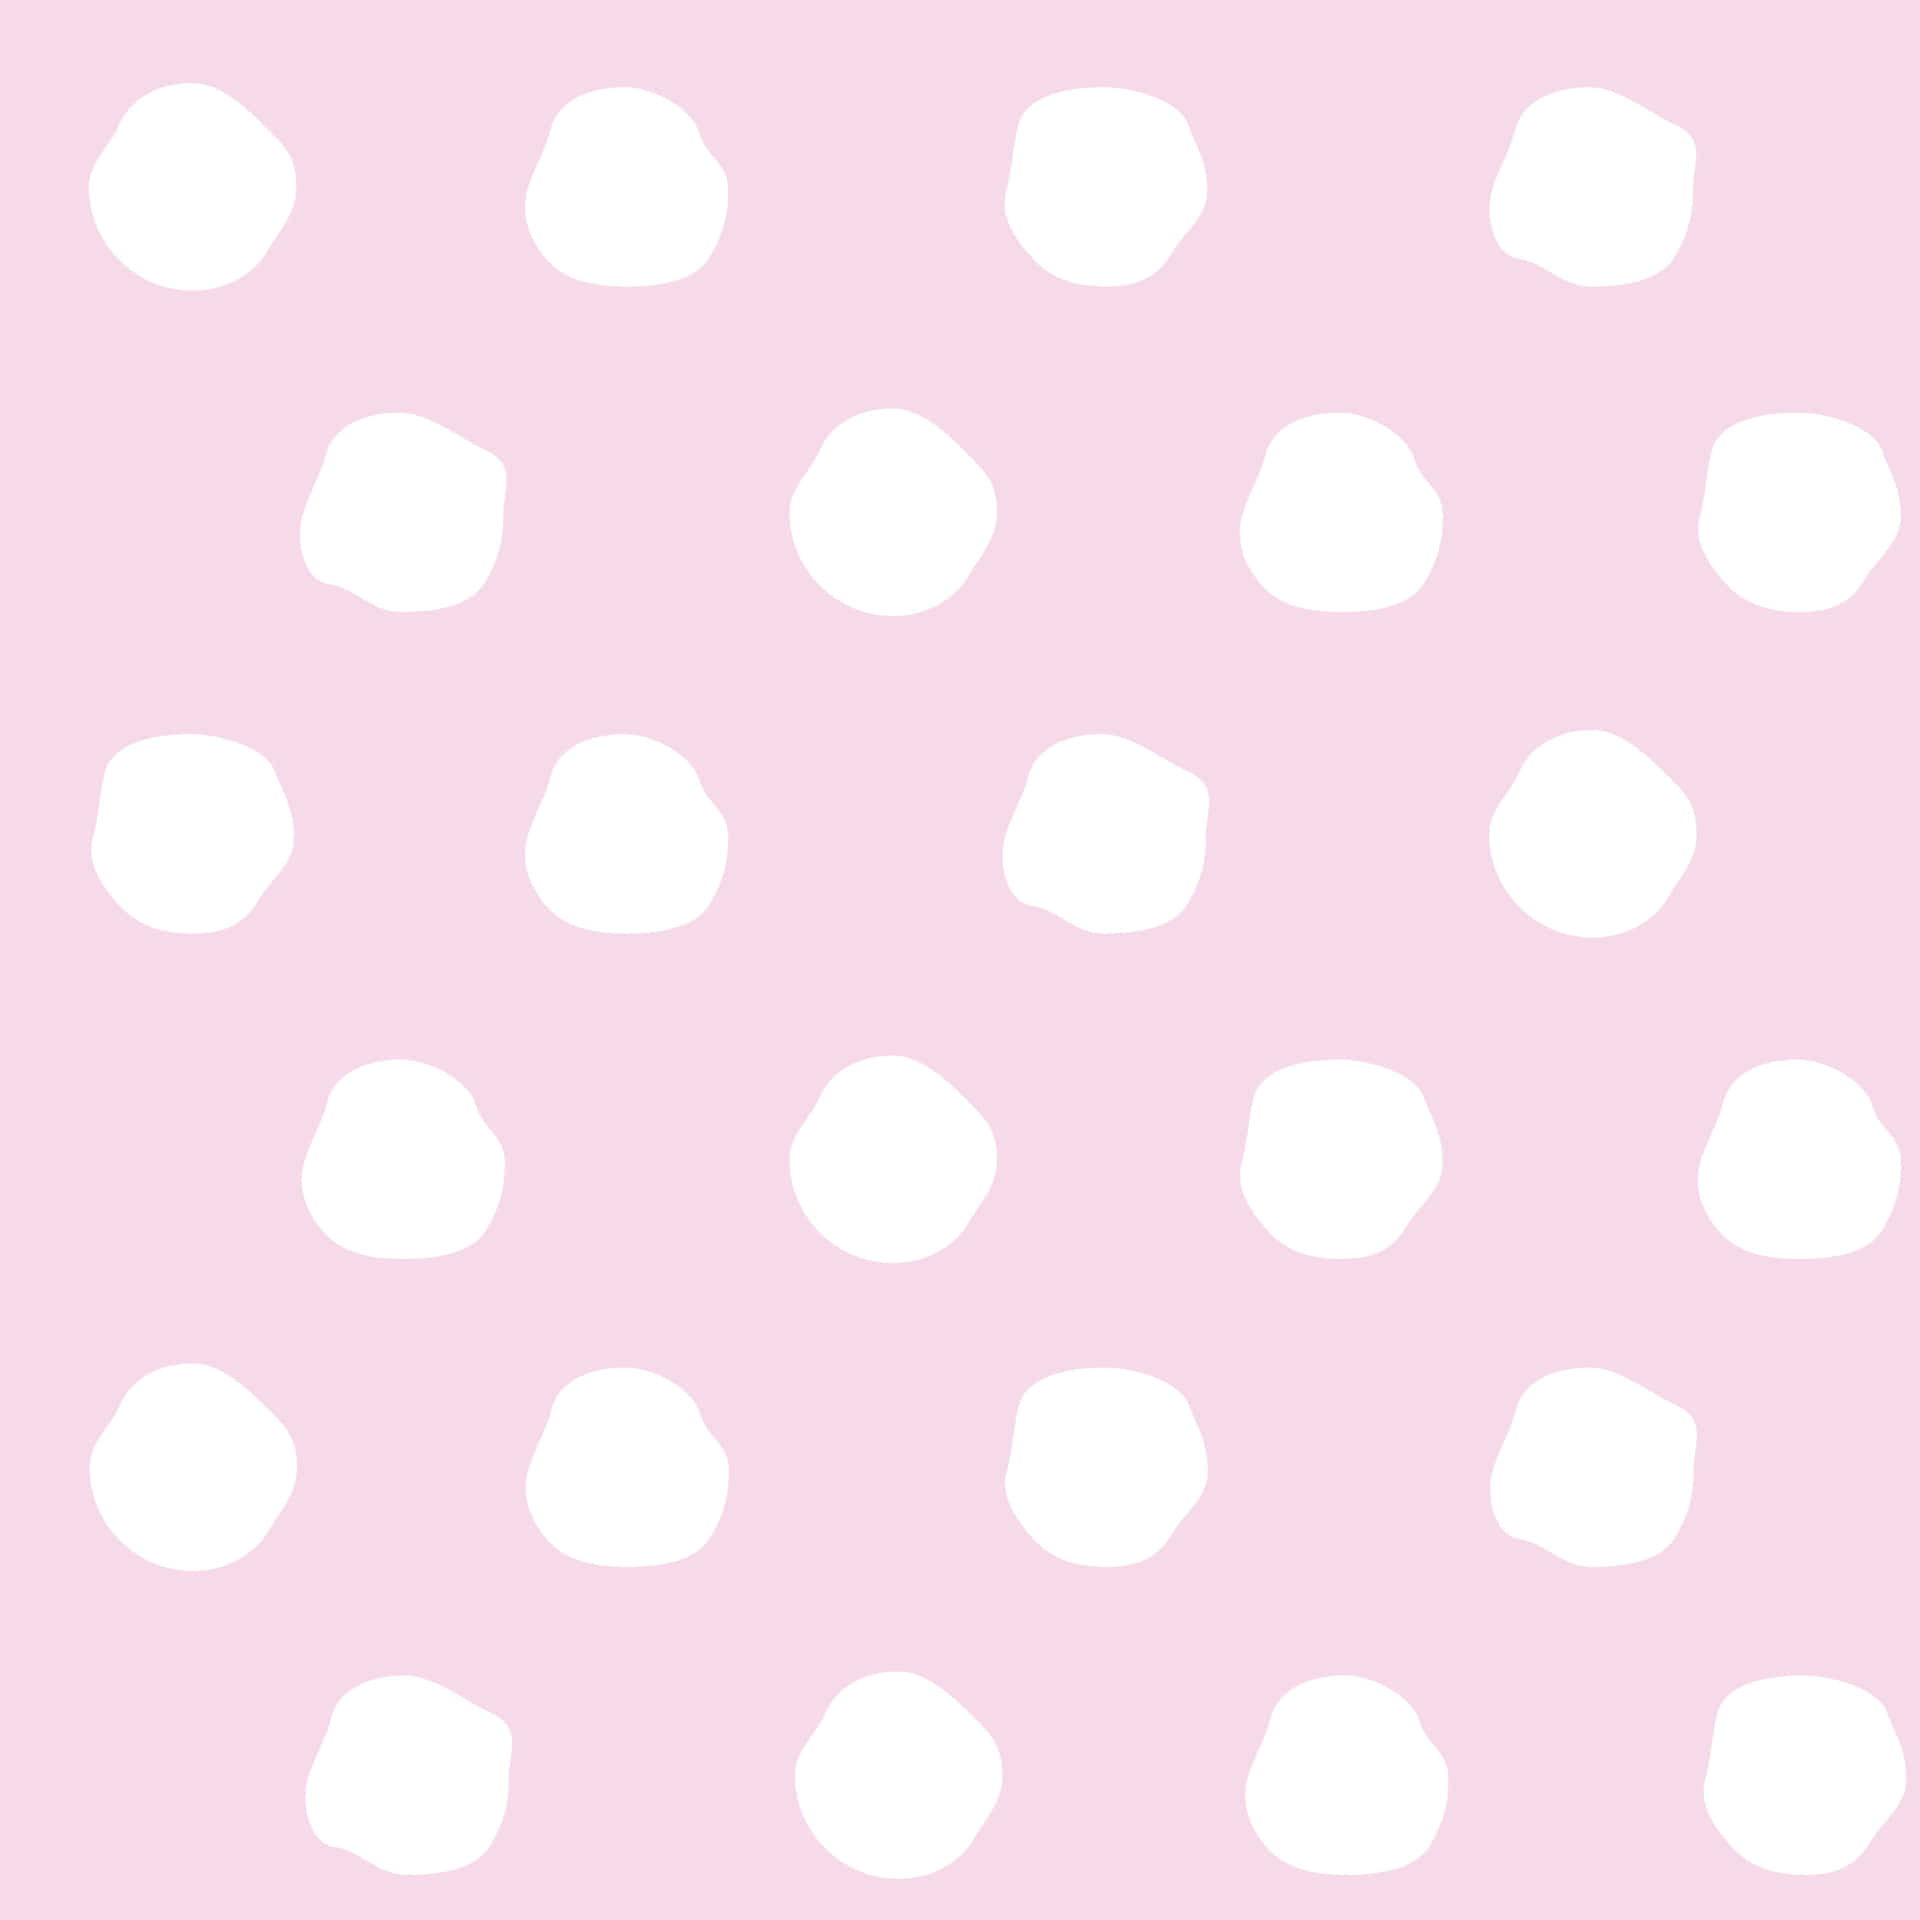 Enjoy the bold look of a classic retro pattern with this beautiful Pink and White Polka Dot wall art. Wallpaper